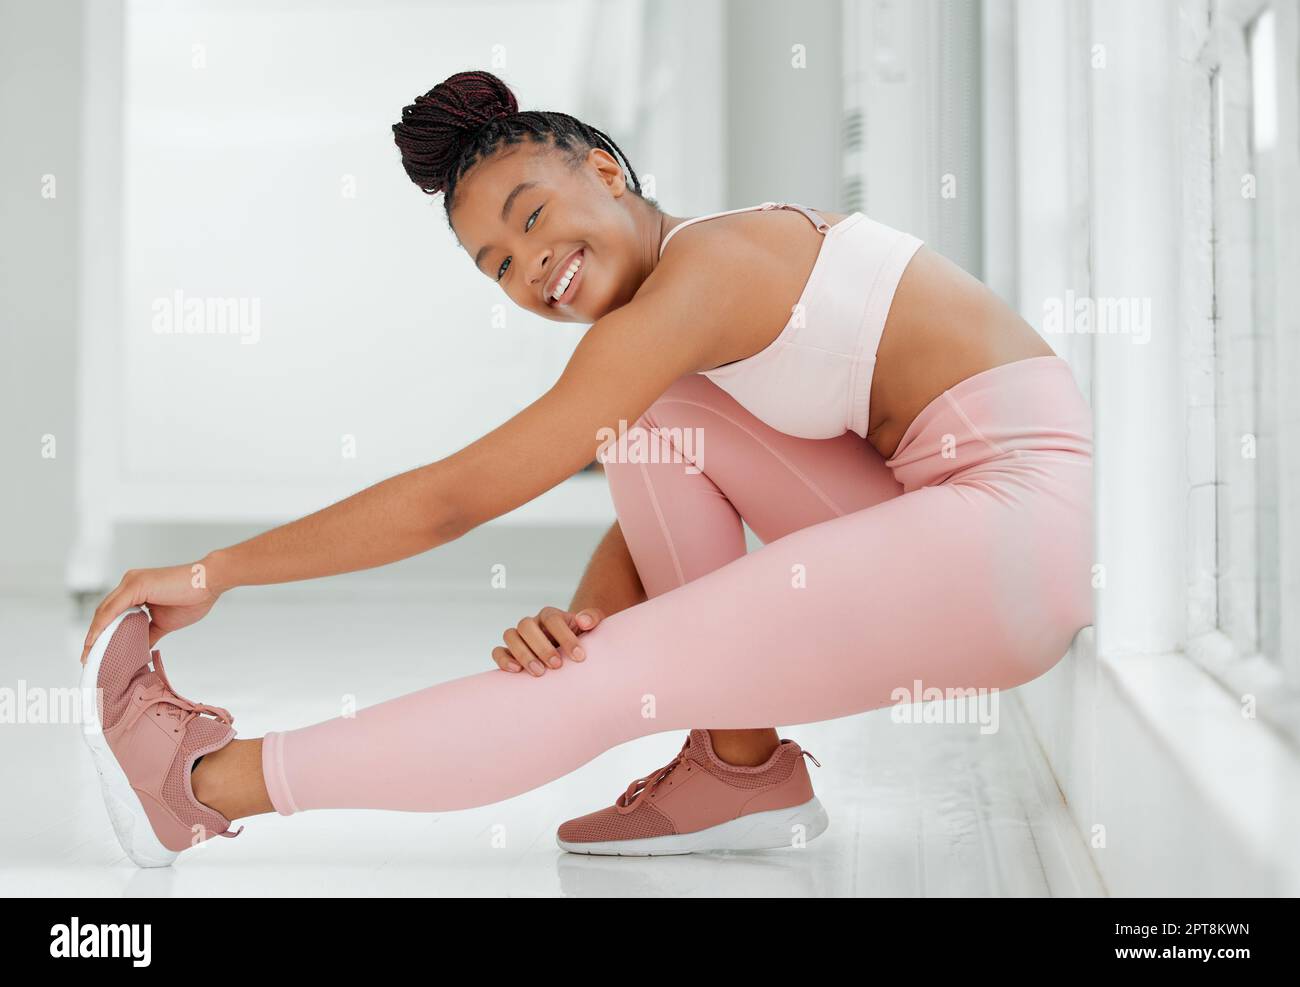 If youre feeling lazy then go to the gym lazy. a beautiful young woman stretching during her workout Stock Photo